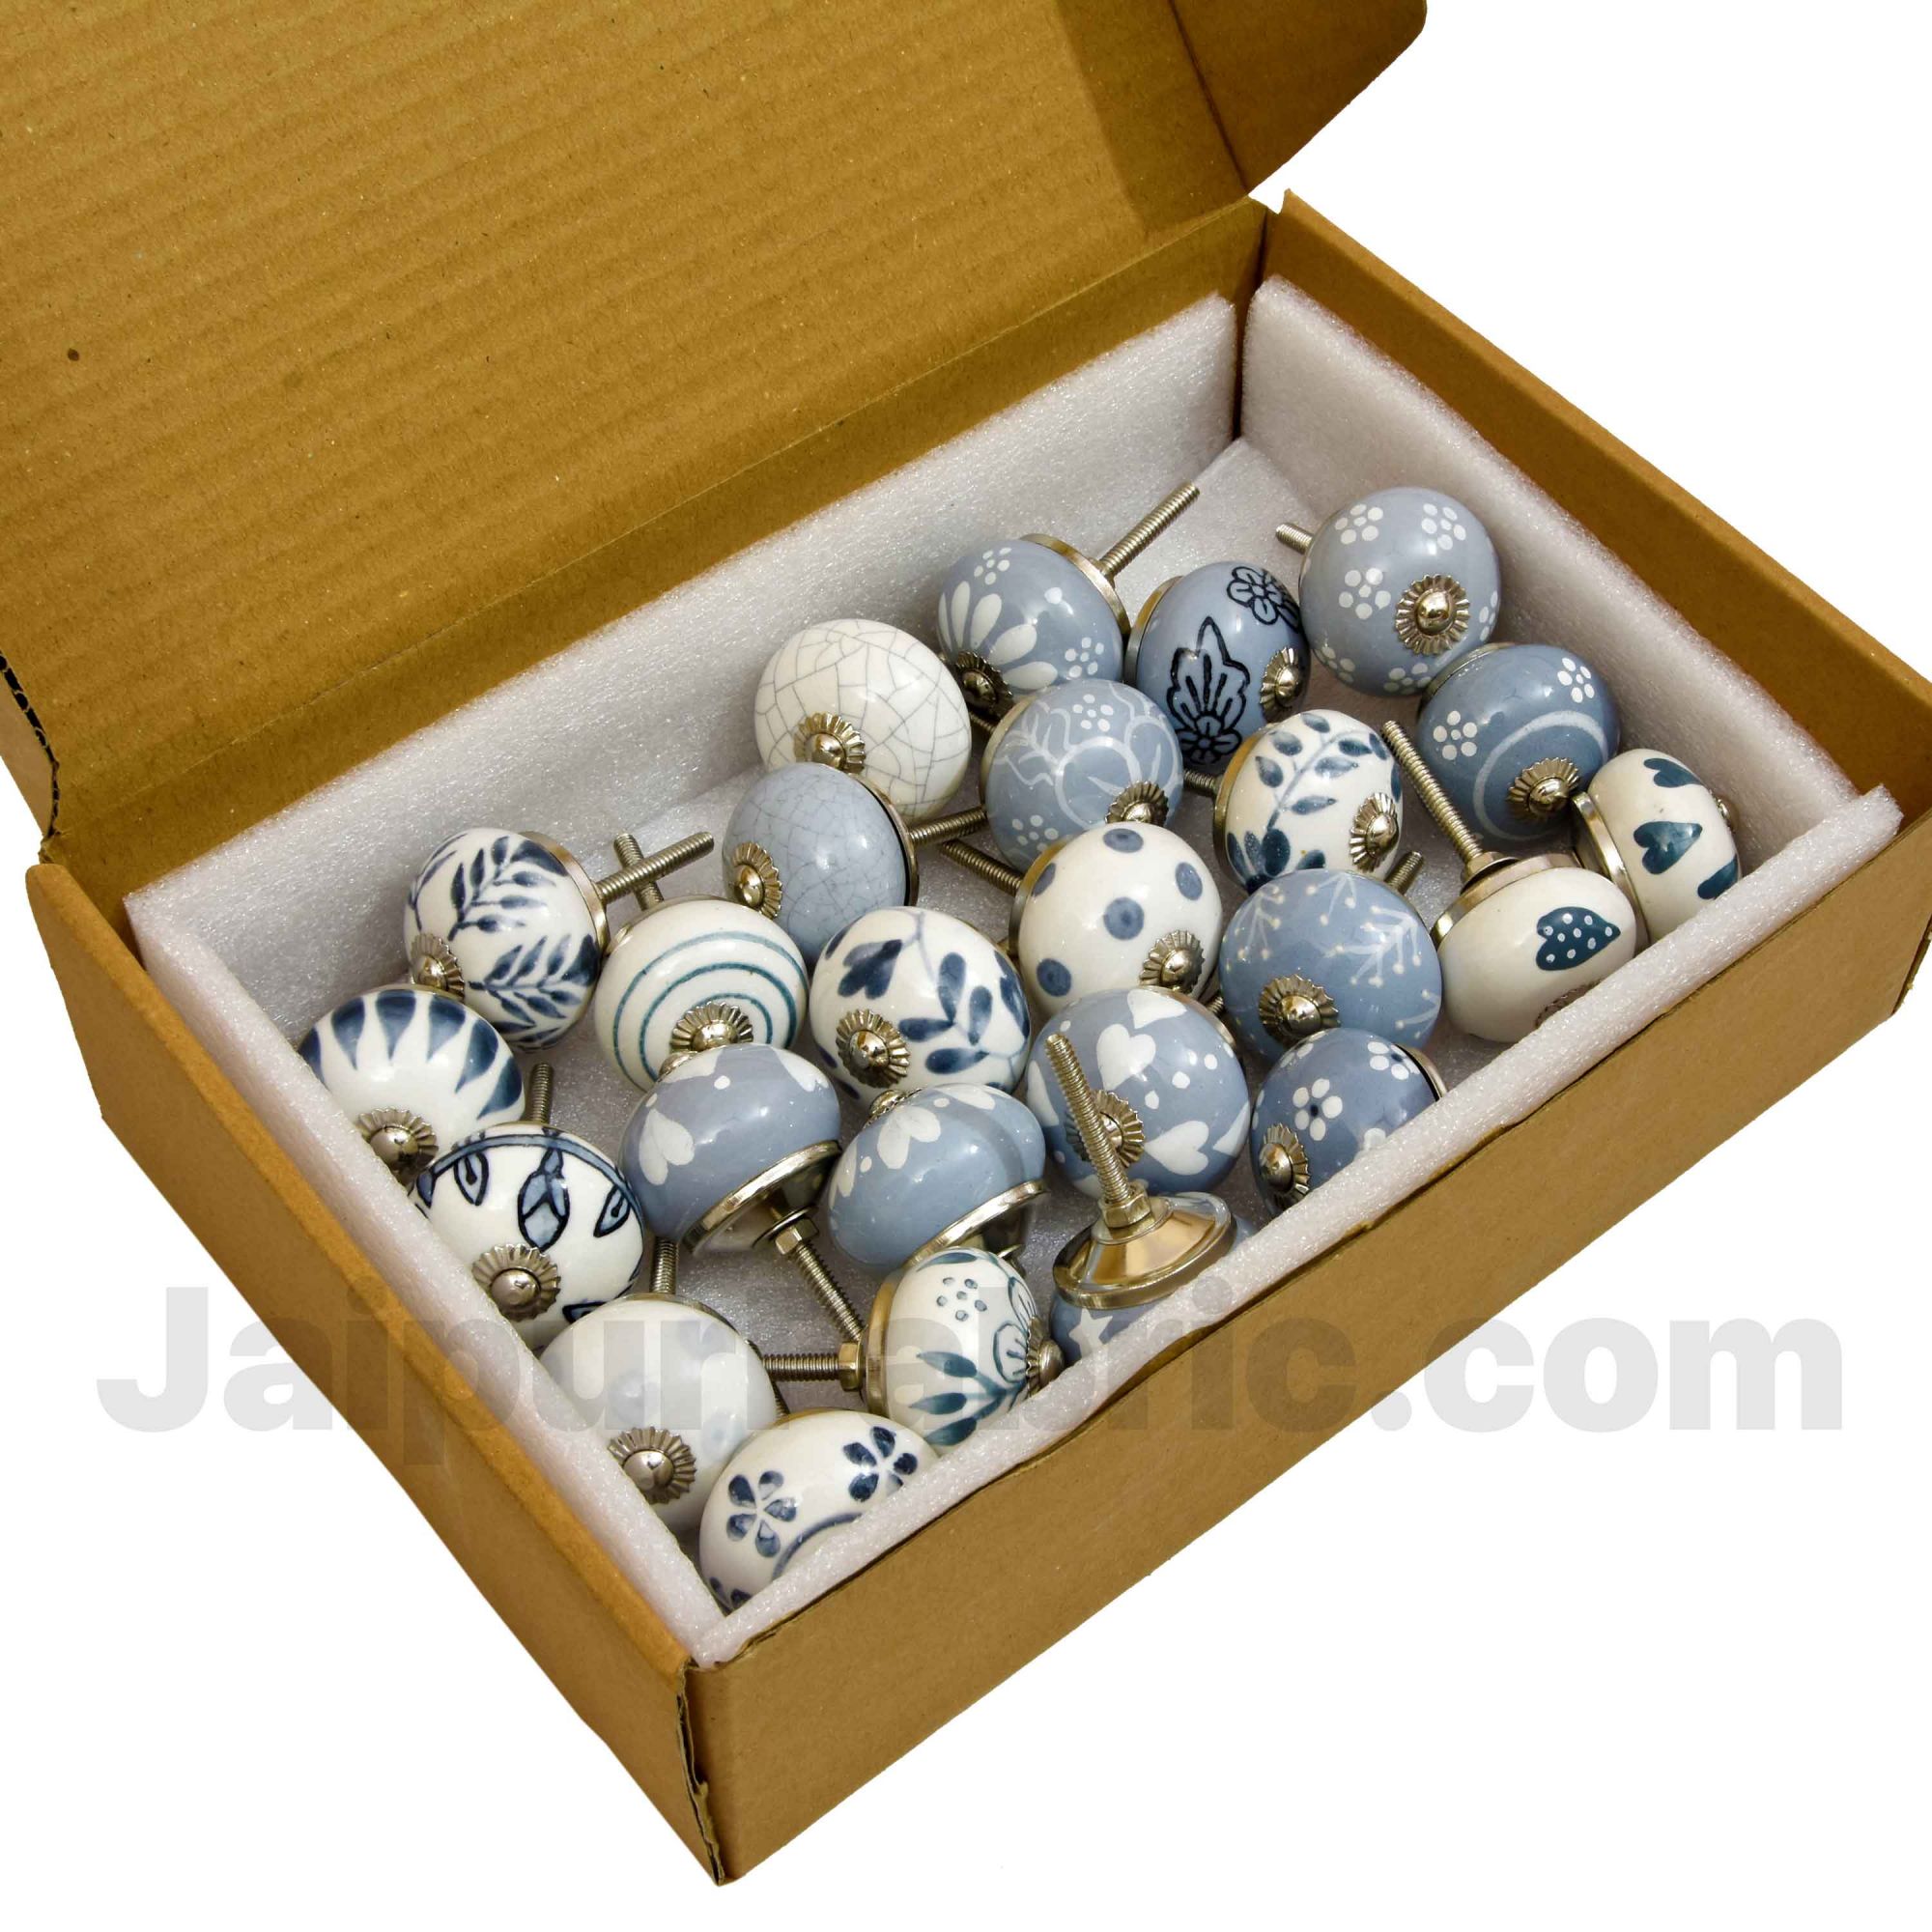 English Ceramic Knob Set of 25 Pcs Fabricated Knobs for Doors and Cabinets with Brass Blue Pottery